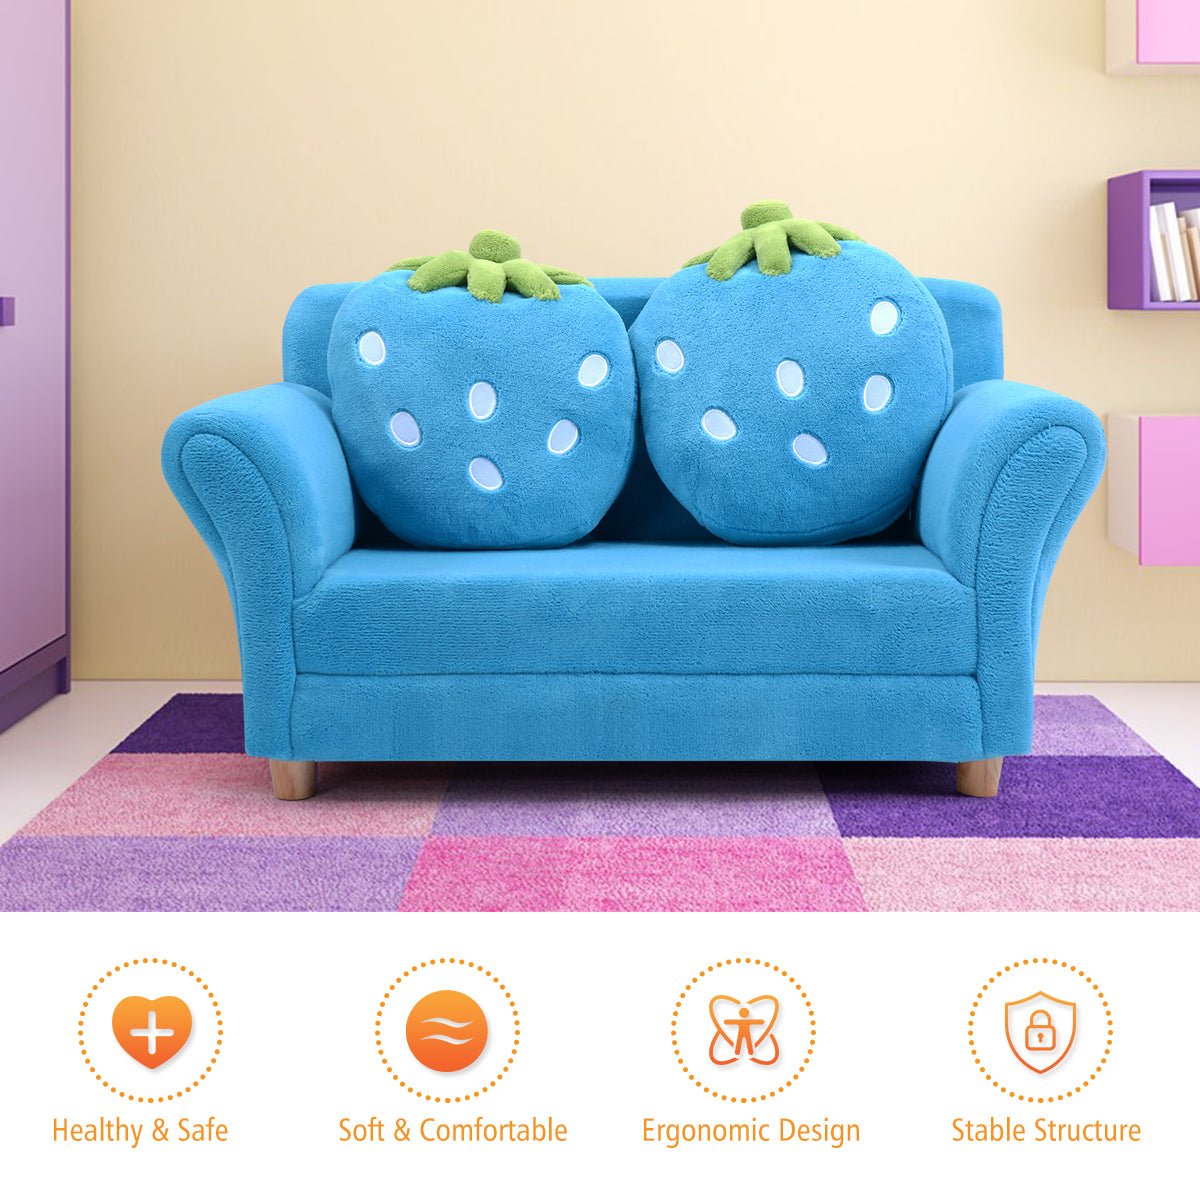 2-Seat Kids Sofa Bed: Cozy Children's Lounge with Adorable Strawberry Pillows